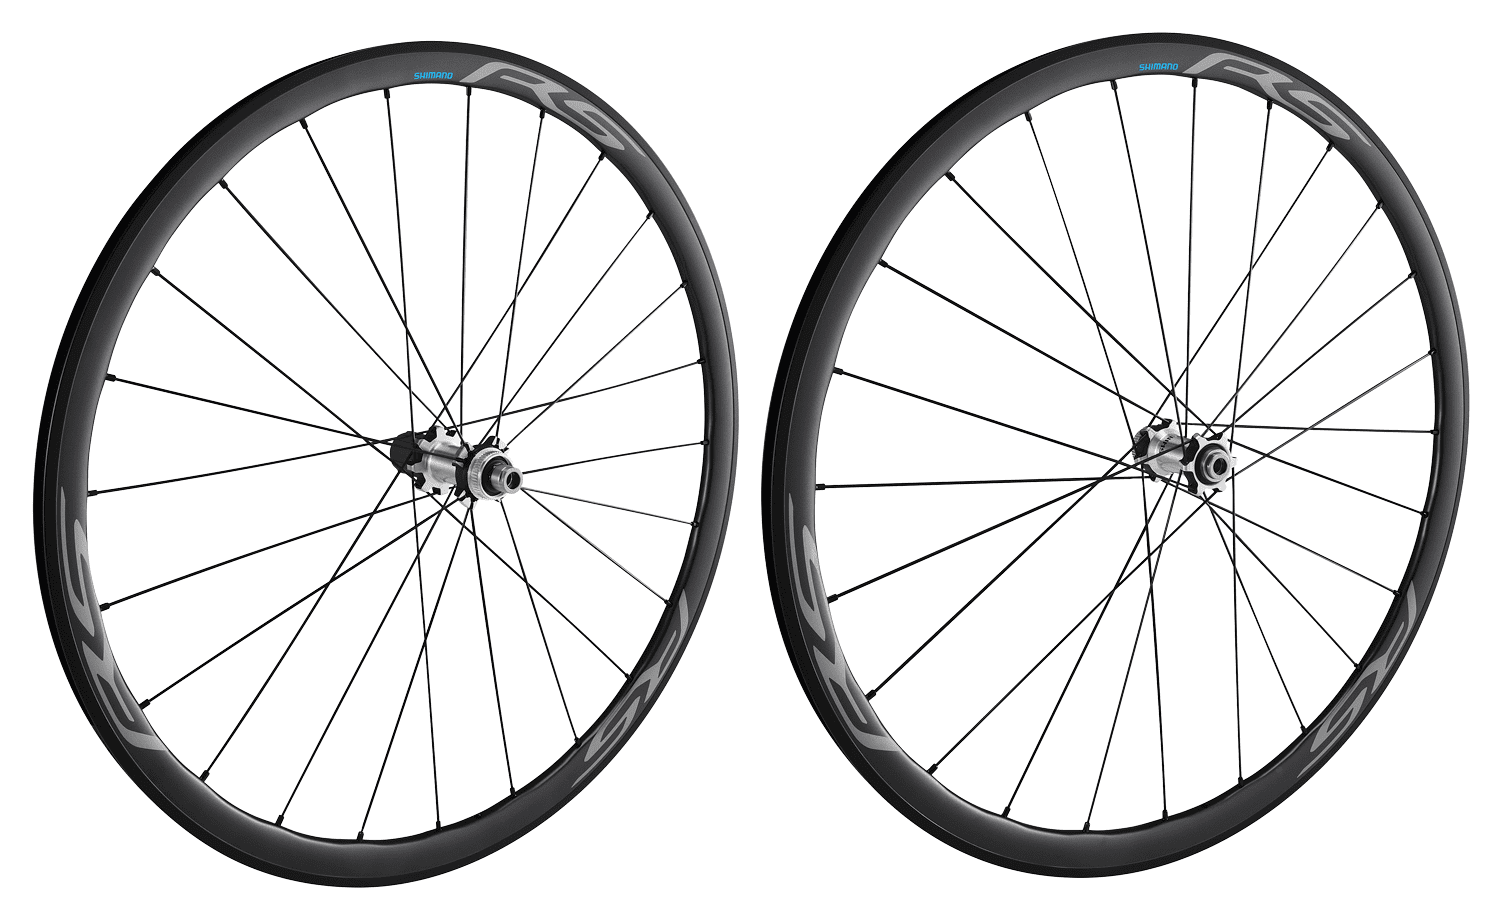 Shimano WH-RS770 wheels for disc brakes